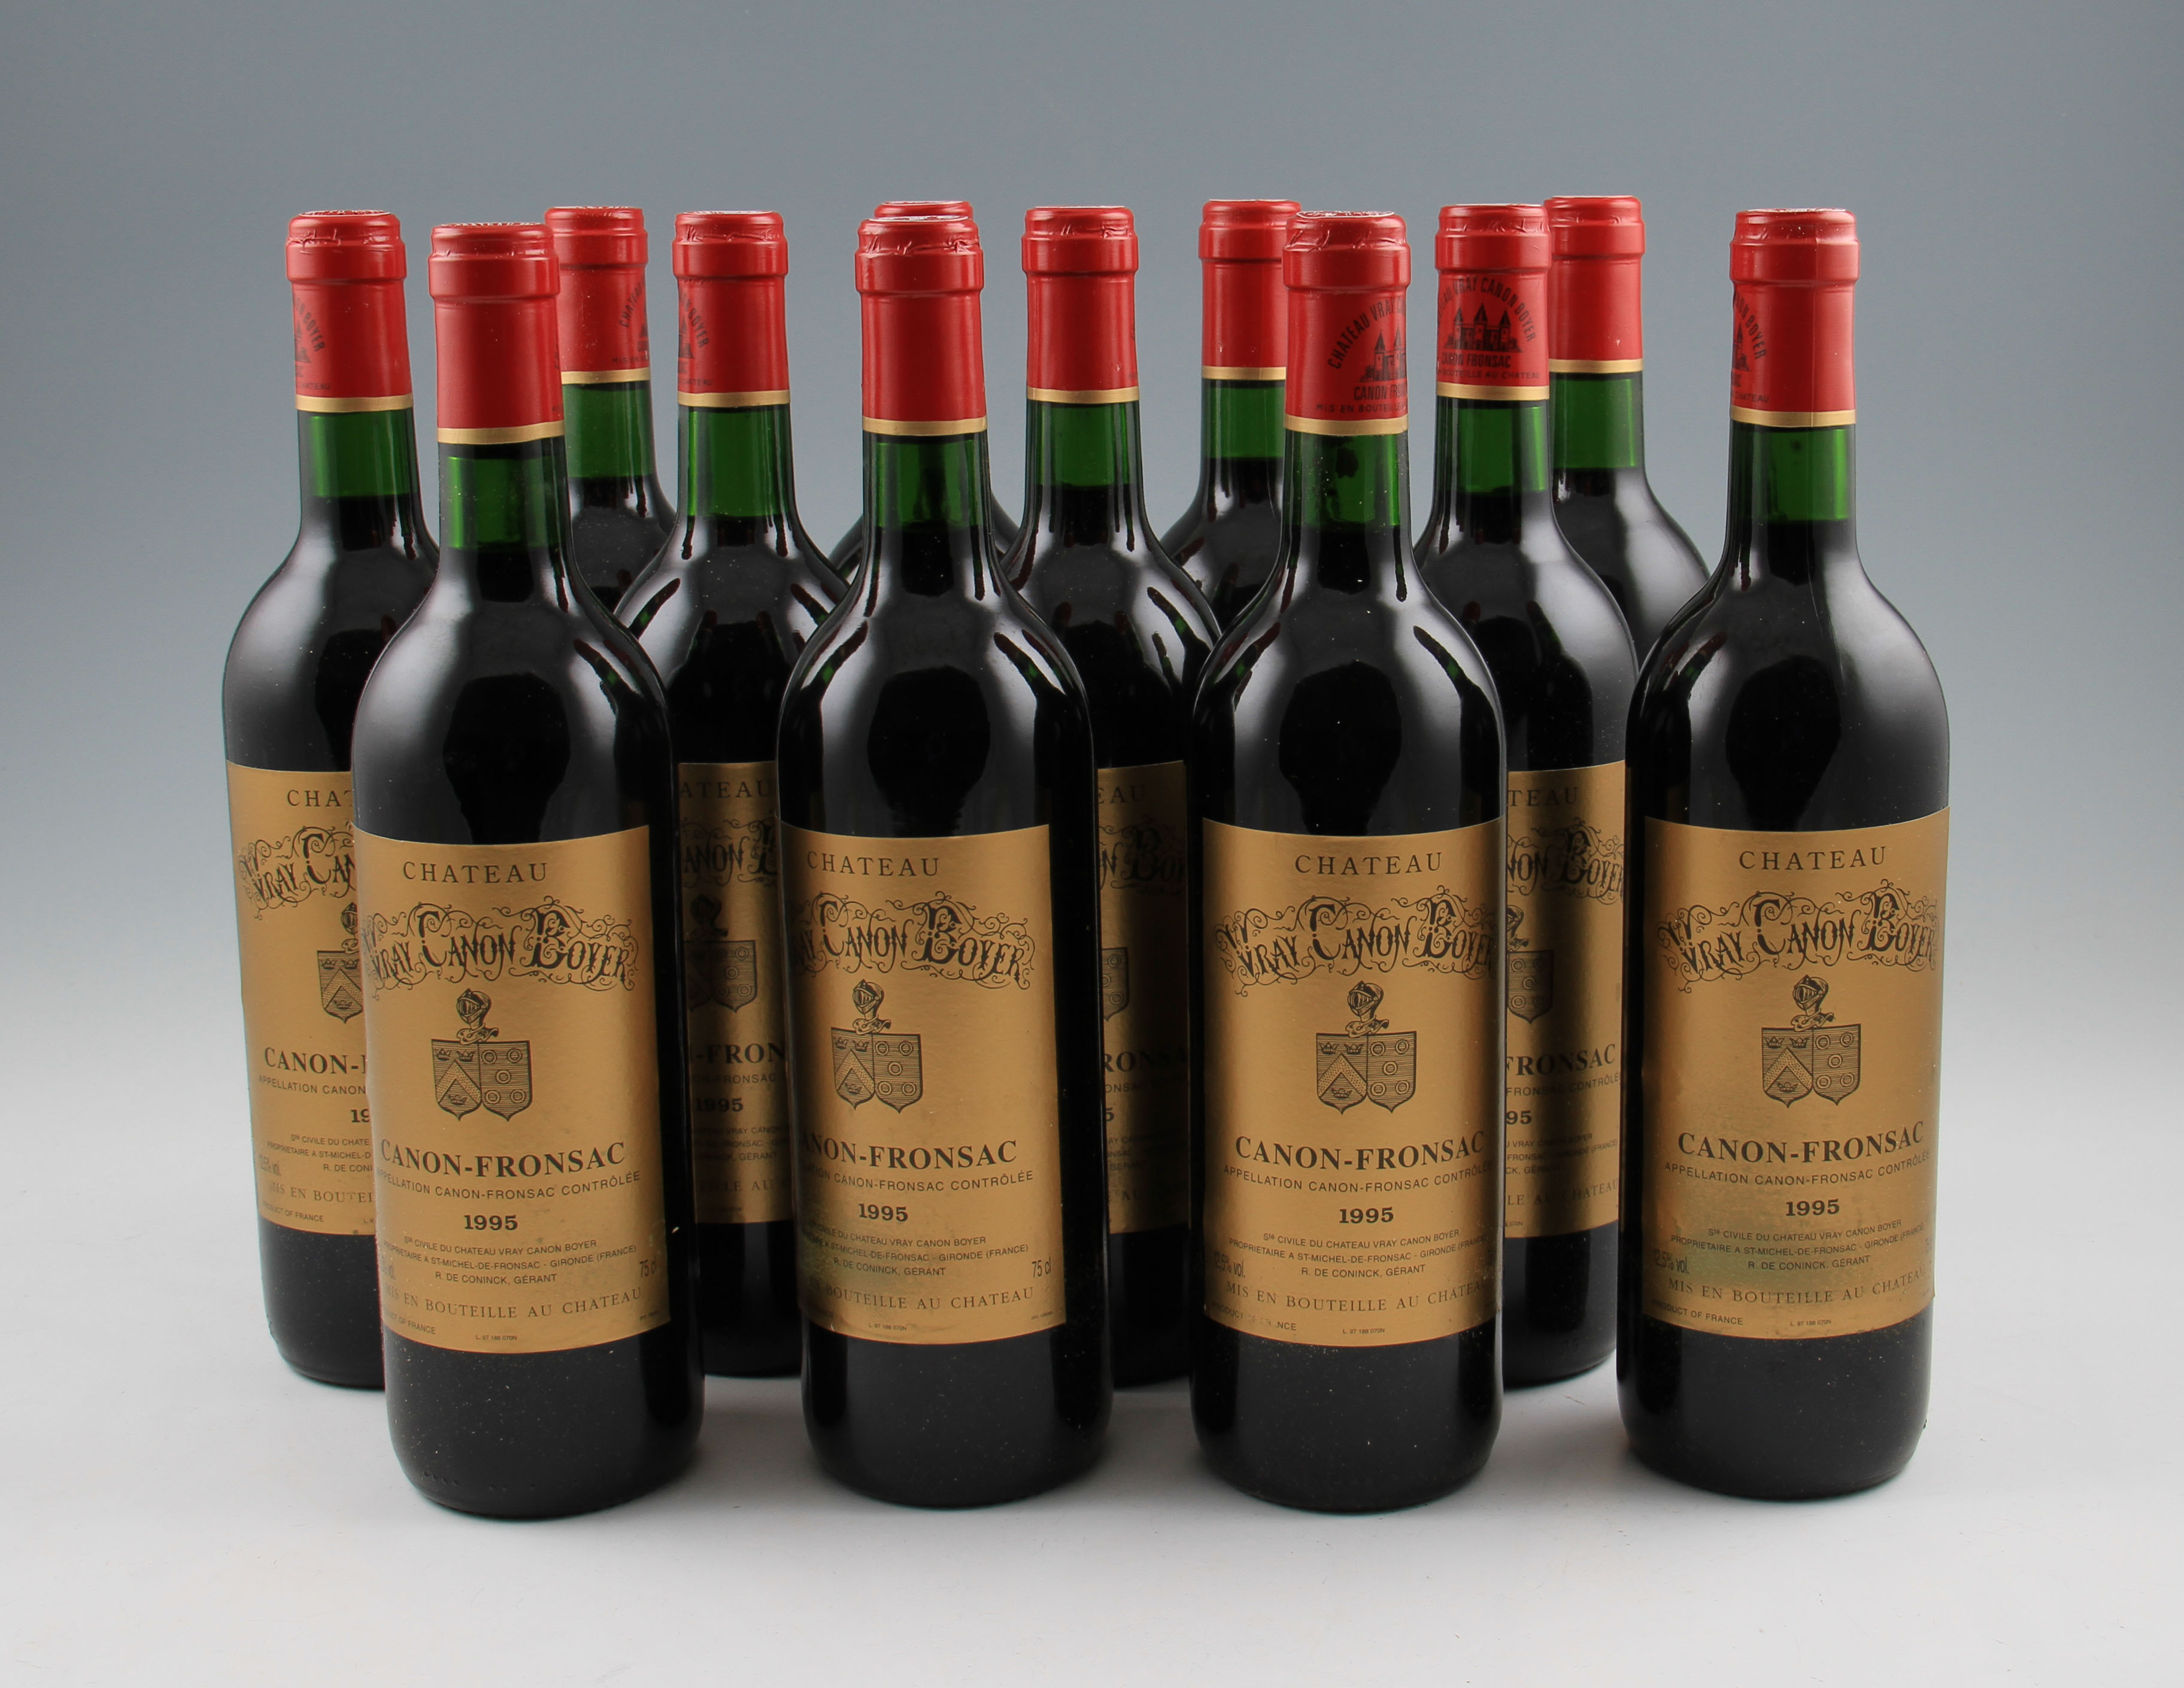 Chateau Vray Canon Boyer Canon Fronsac 1995. 12 bottles. Excellent label & capsule, fill level